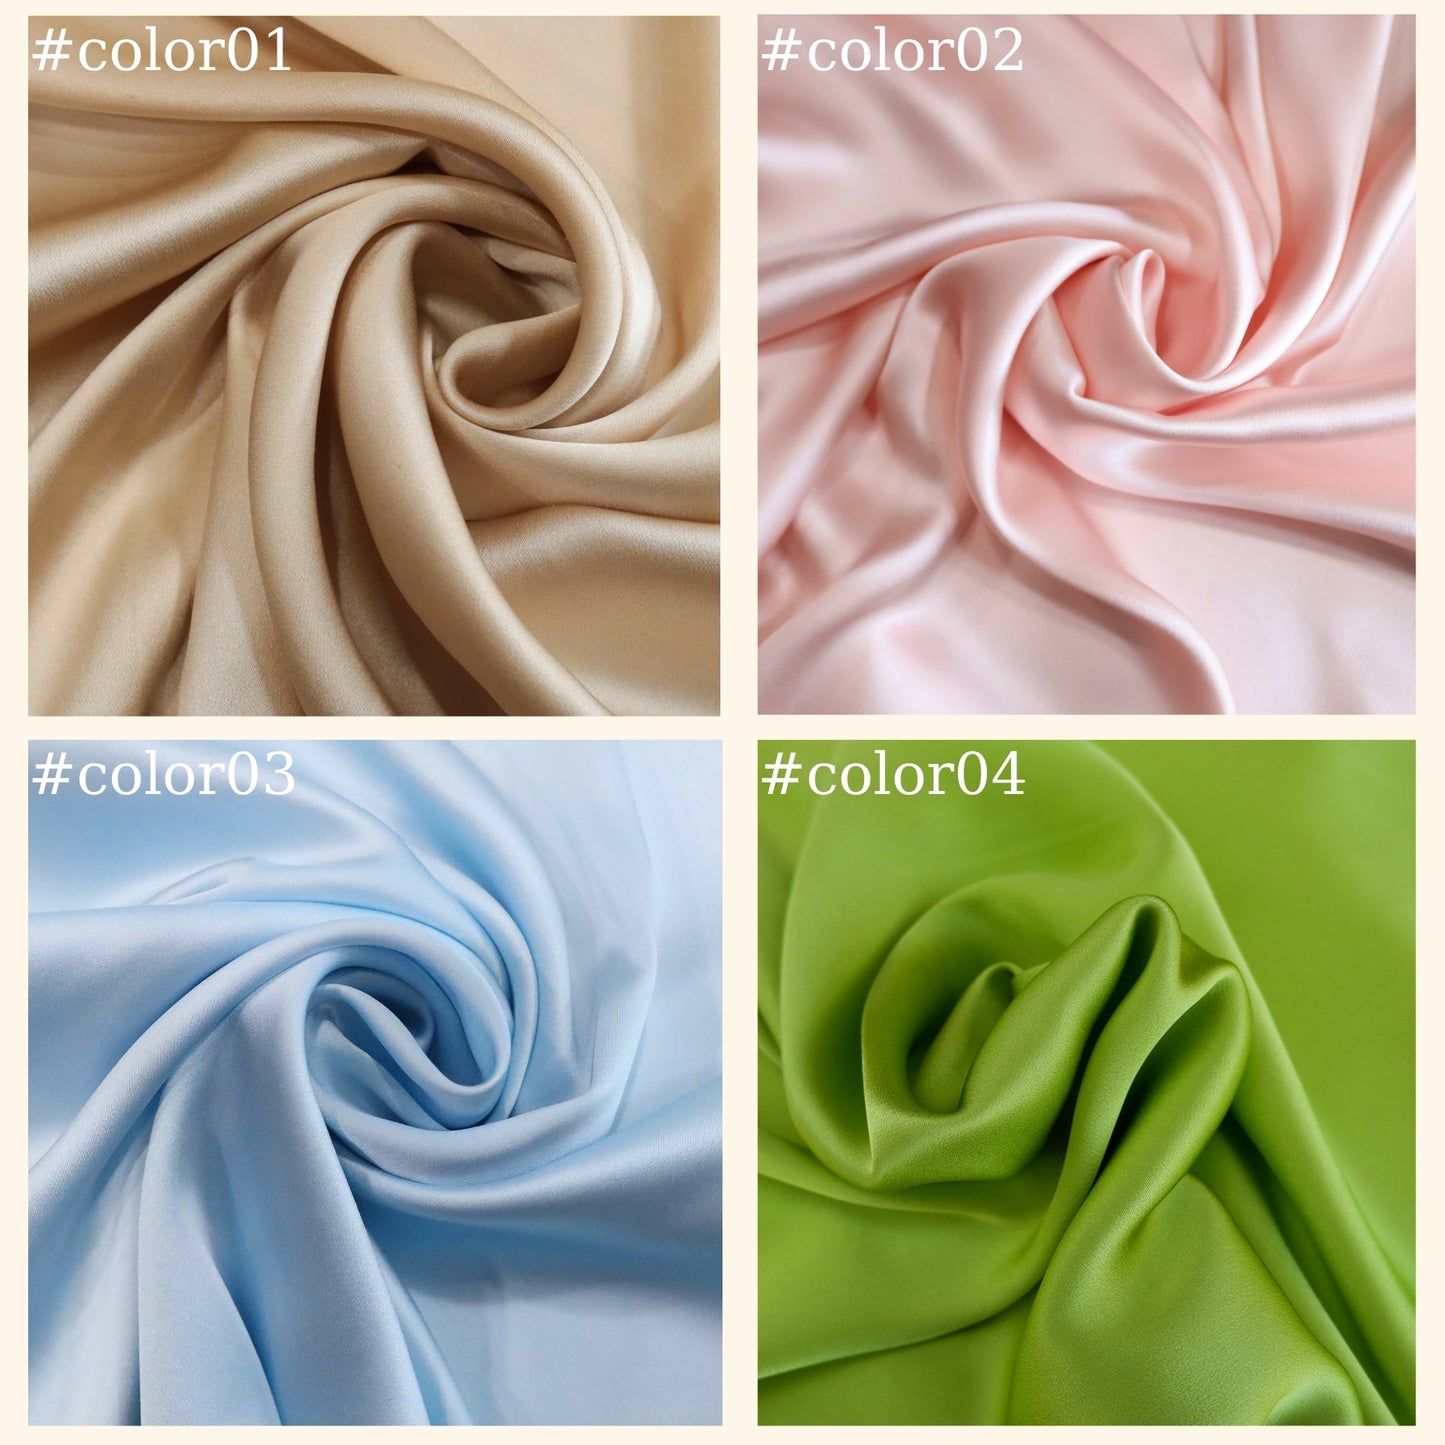 100% Mulberry Silk Satin Fabric - Dress making - Gift for women - Silk apparel fabric - Sewing clothes